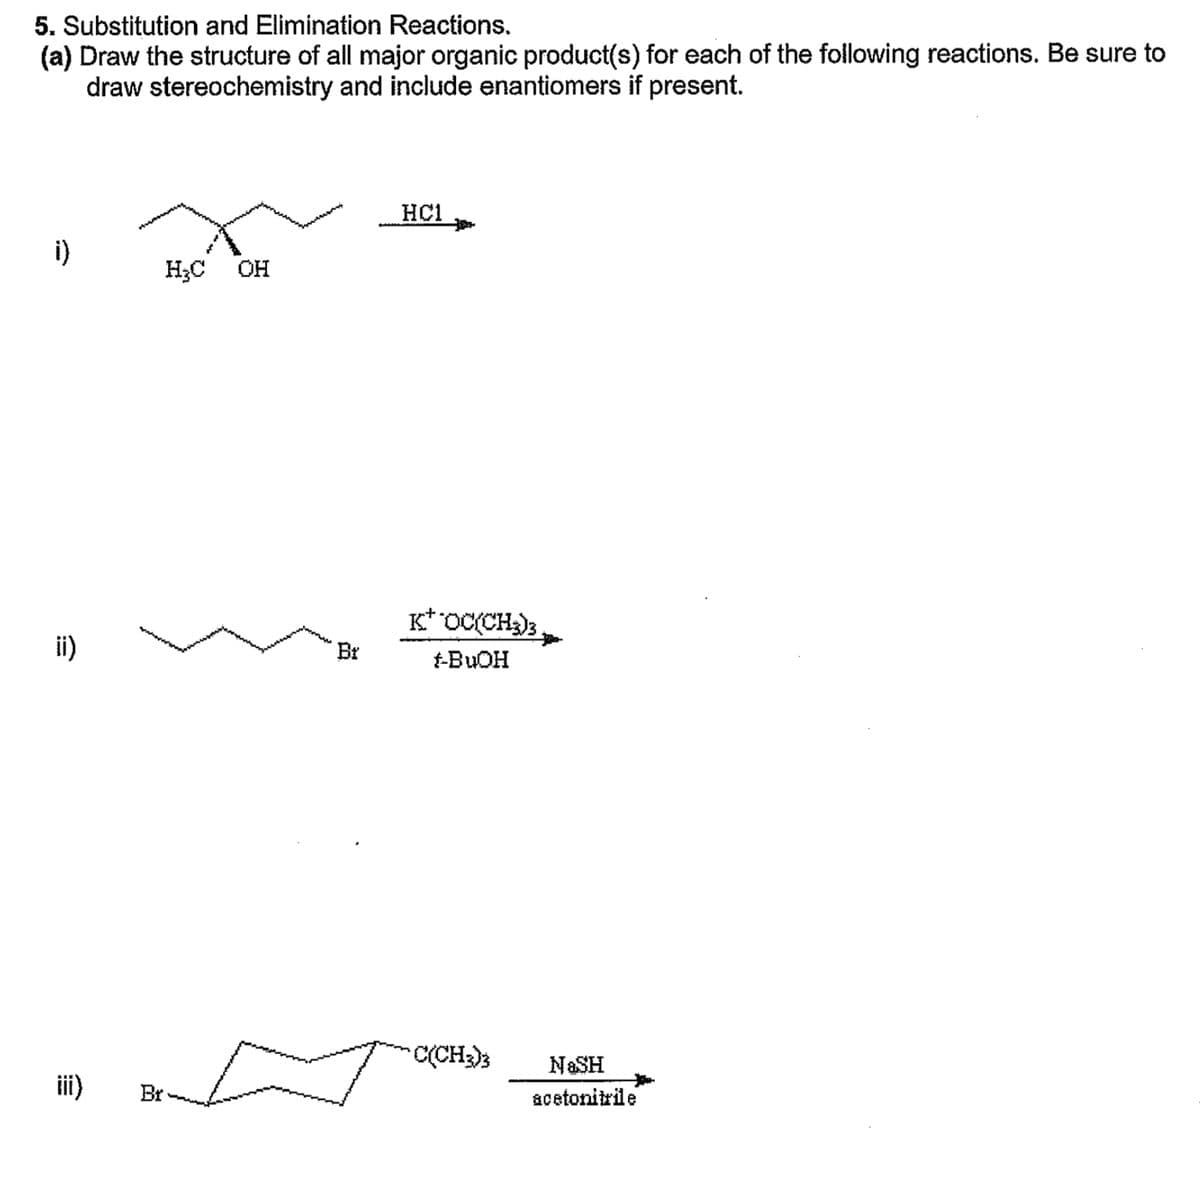 5. Substitution and Elimination Reactions.
(a) Draw the structure of all major organic product(s) for each of the following reactions. Be sure to
draw stereochemistry and include enantiomers if present.
i)
ii)
H₂C OH
Br
Br
HC1
t
K* OC(CH3)3
t-BuOH
C(CH3)3
NASH
acetonitrile